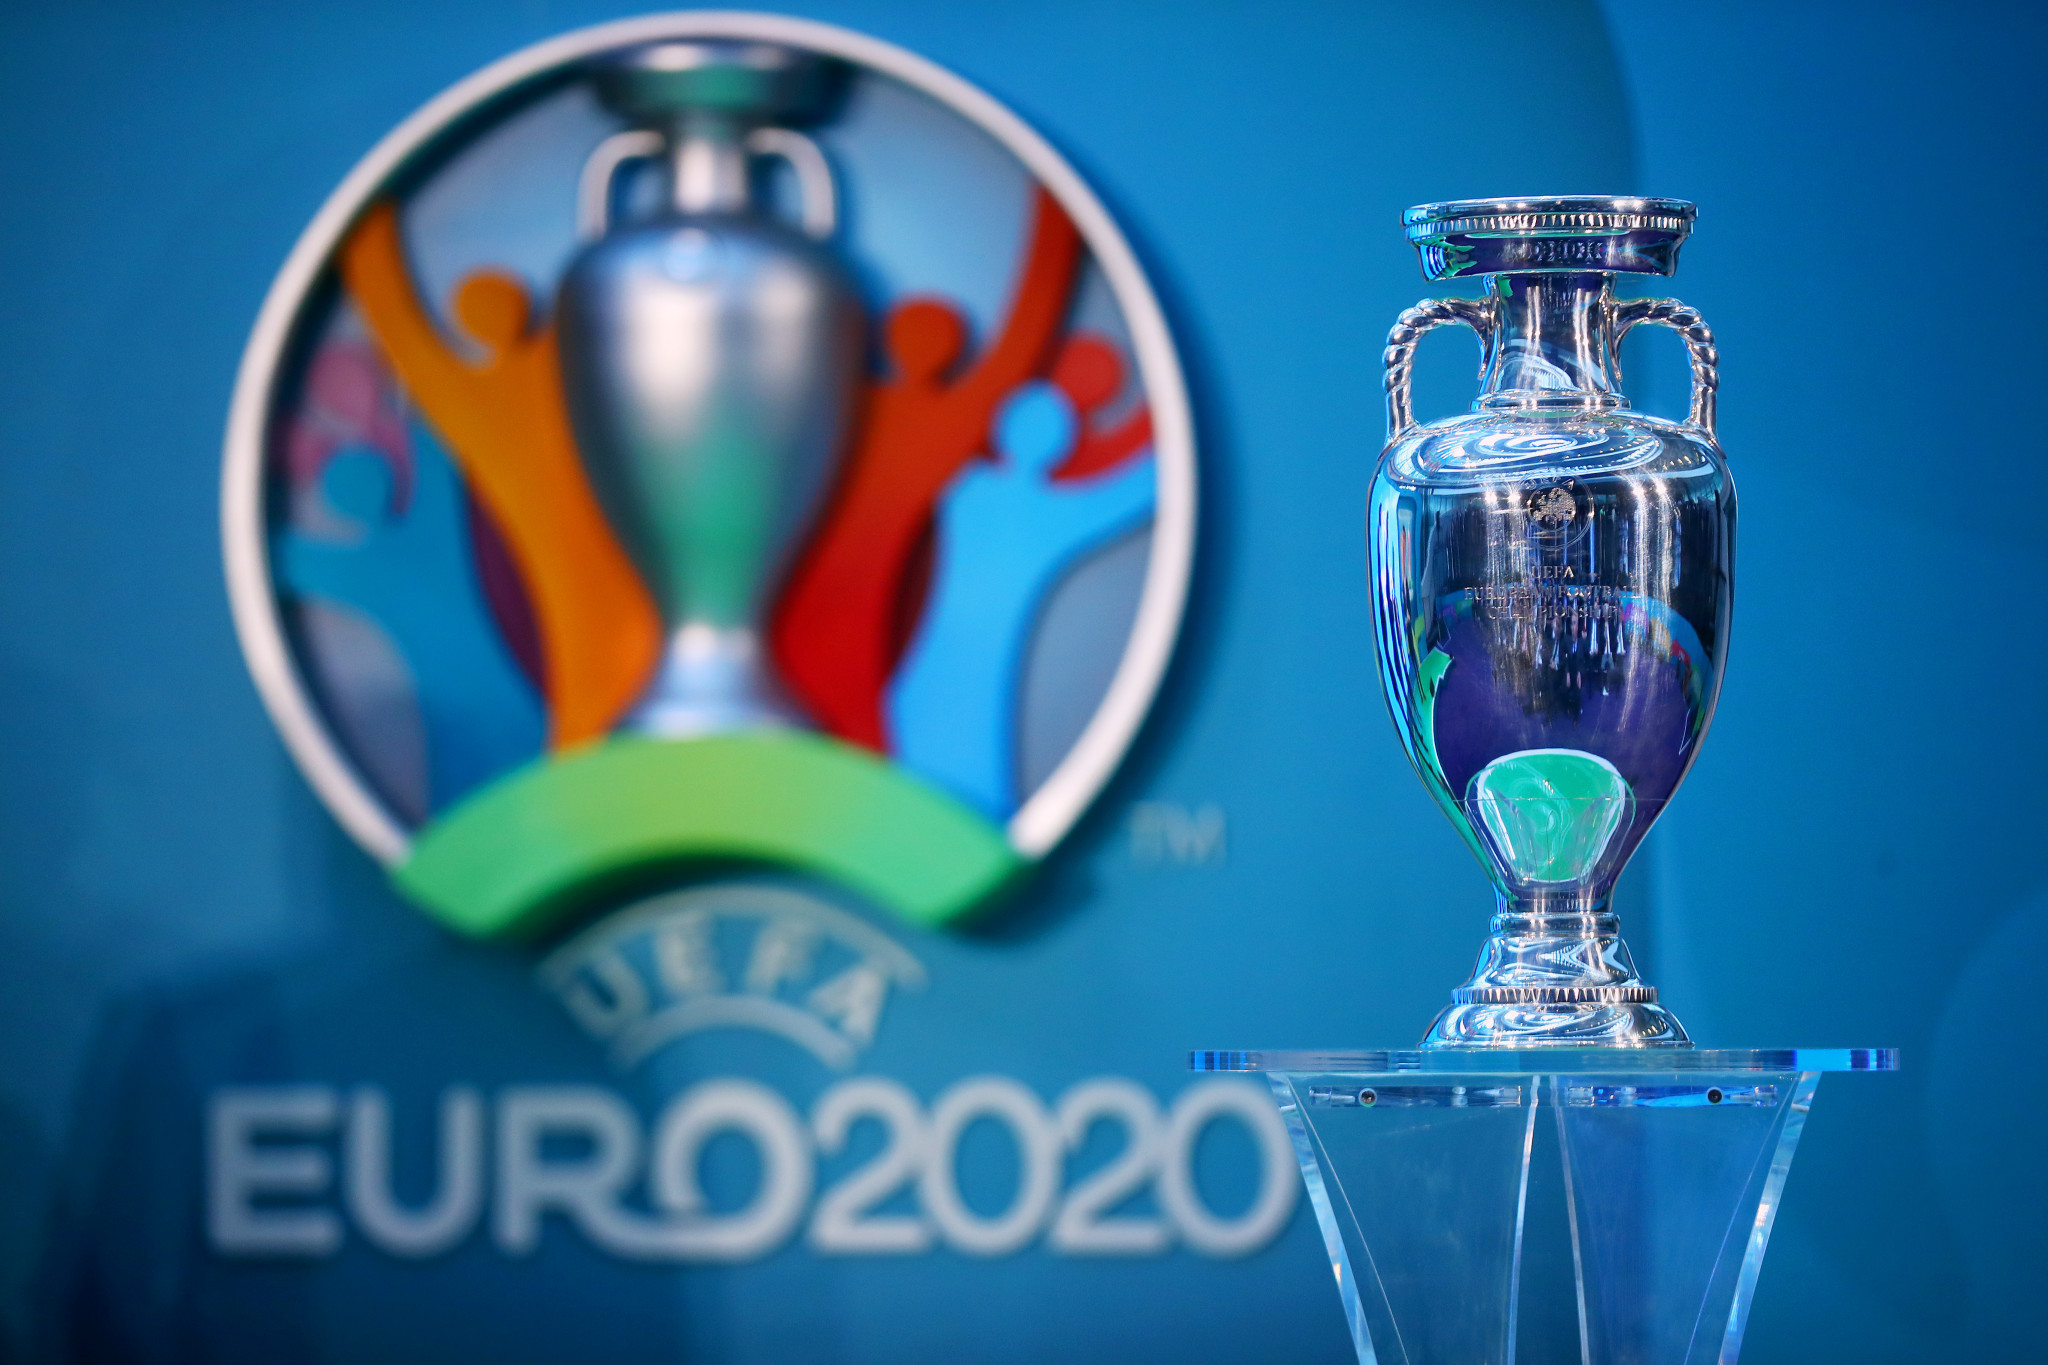 Euro 2020 has been pushed back to 2021 due to the pandemic ©Getty Images